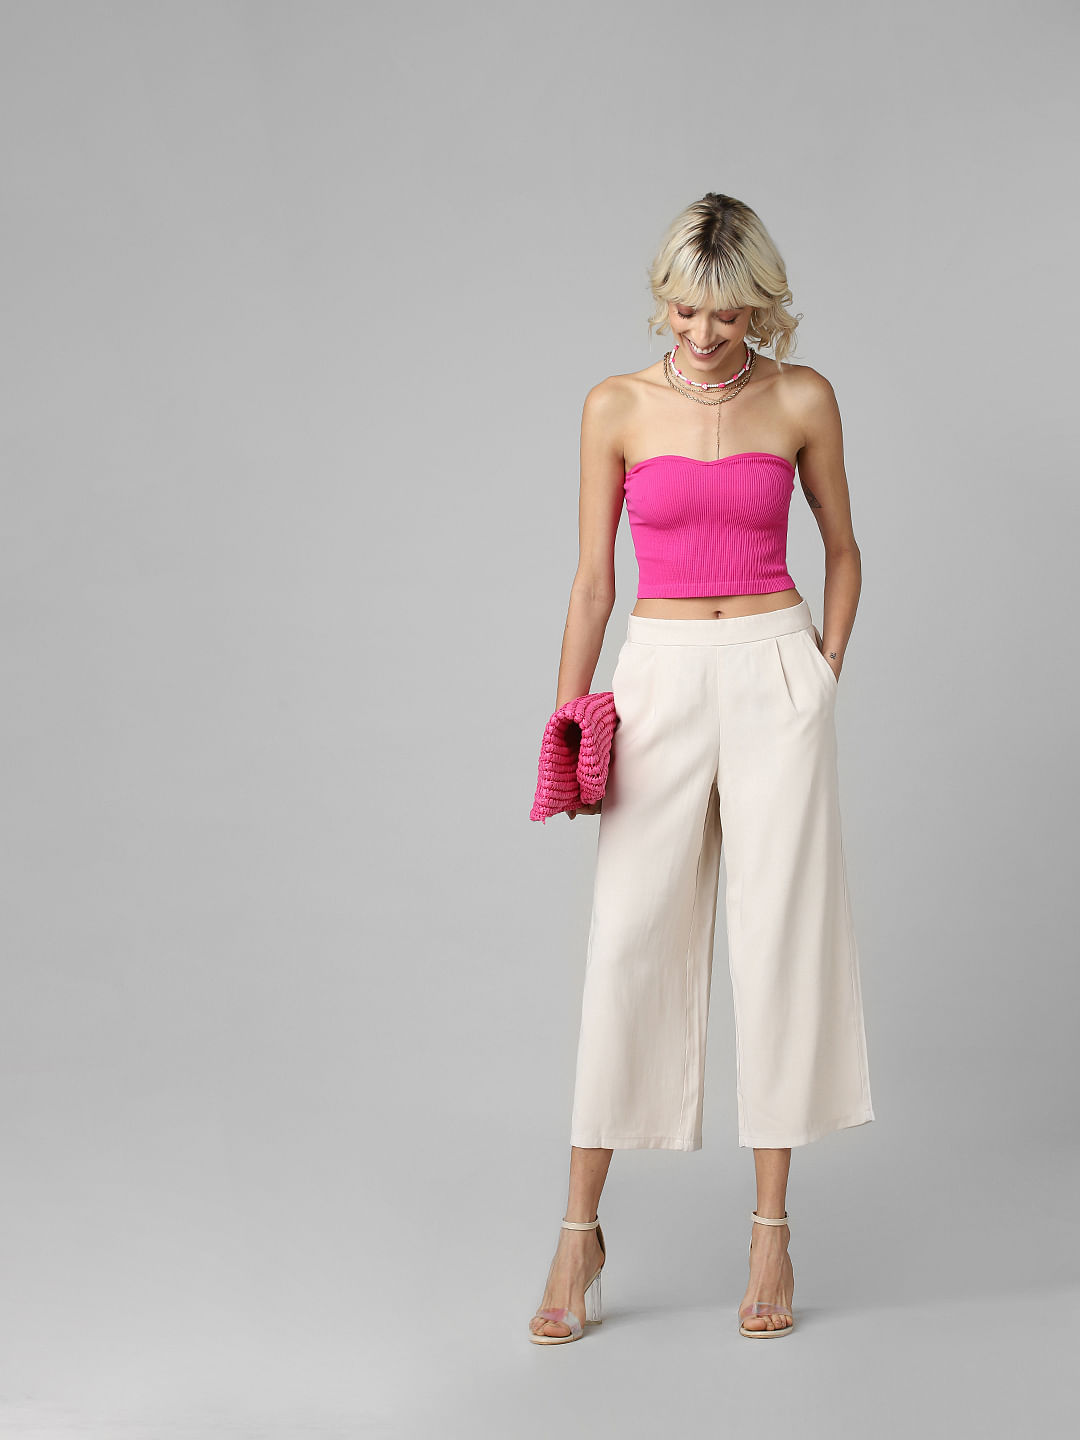 Mango Women's Knitted Culotte Trousers | Hawthorn Mall